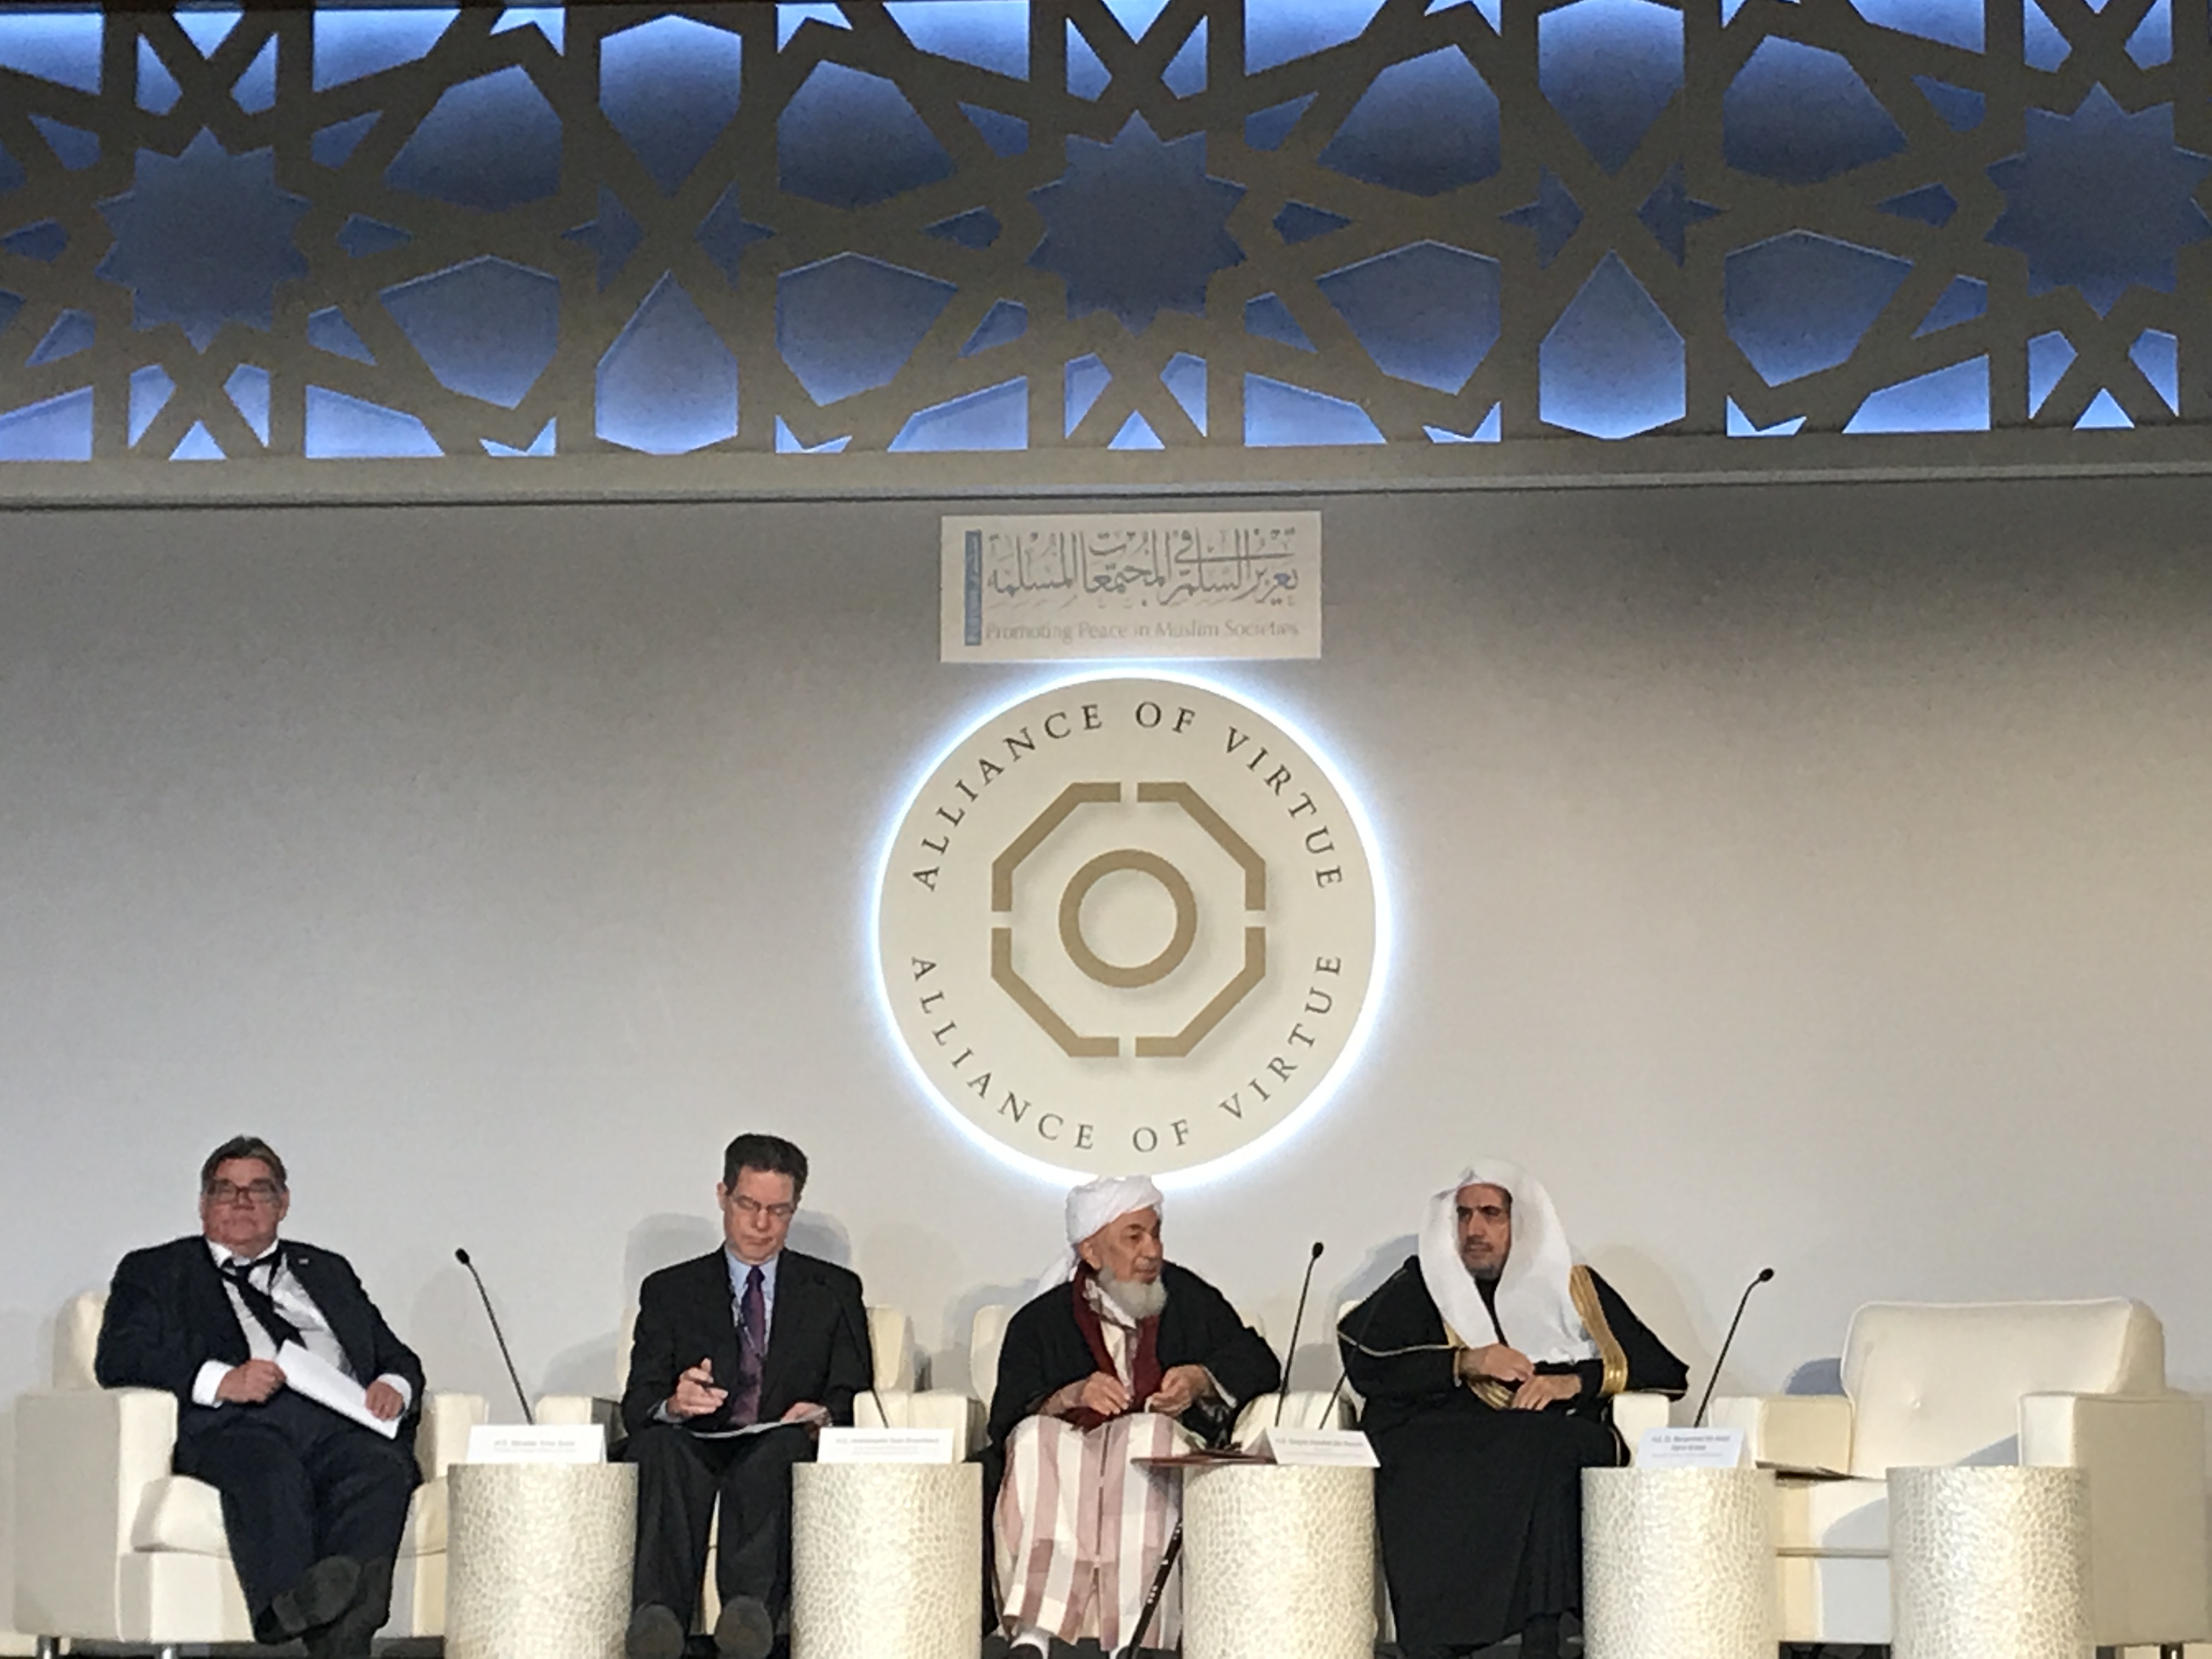 From left to right :Foreign Minister of Finland Time Soini and US Ambassador Freedom Sam Brownback and President, Sheikh Abdulllah bin Bayyah and Dr. Mohammed bin Abdulkarim Al-Issa